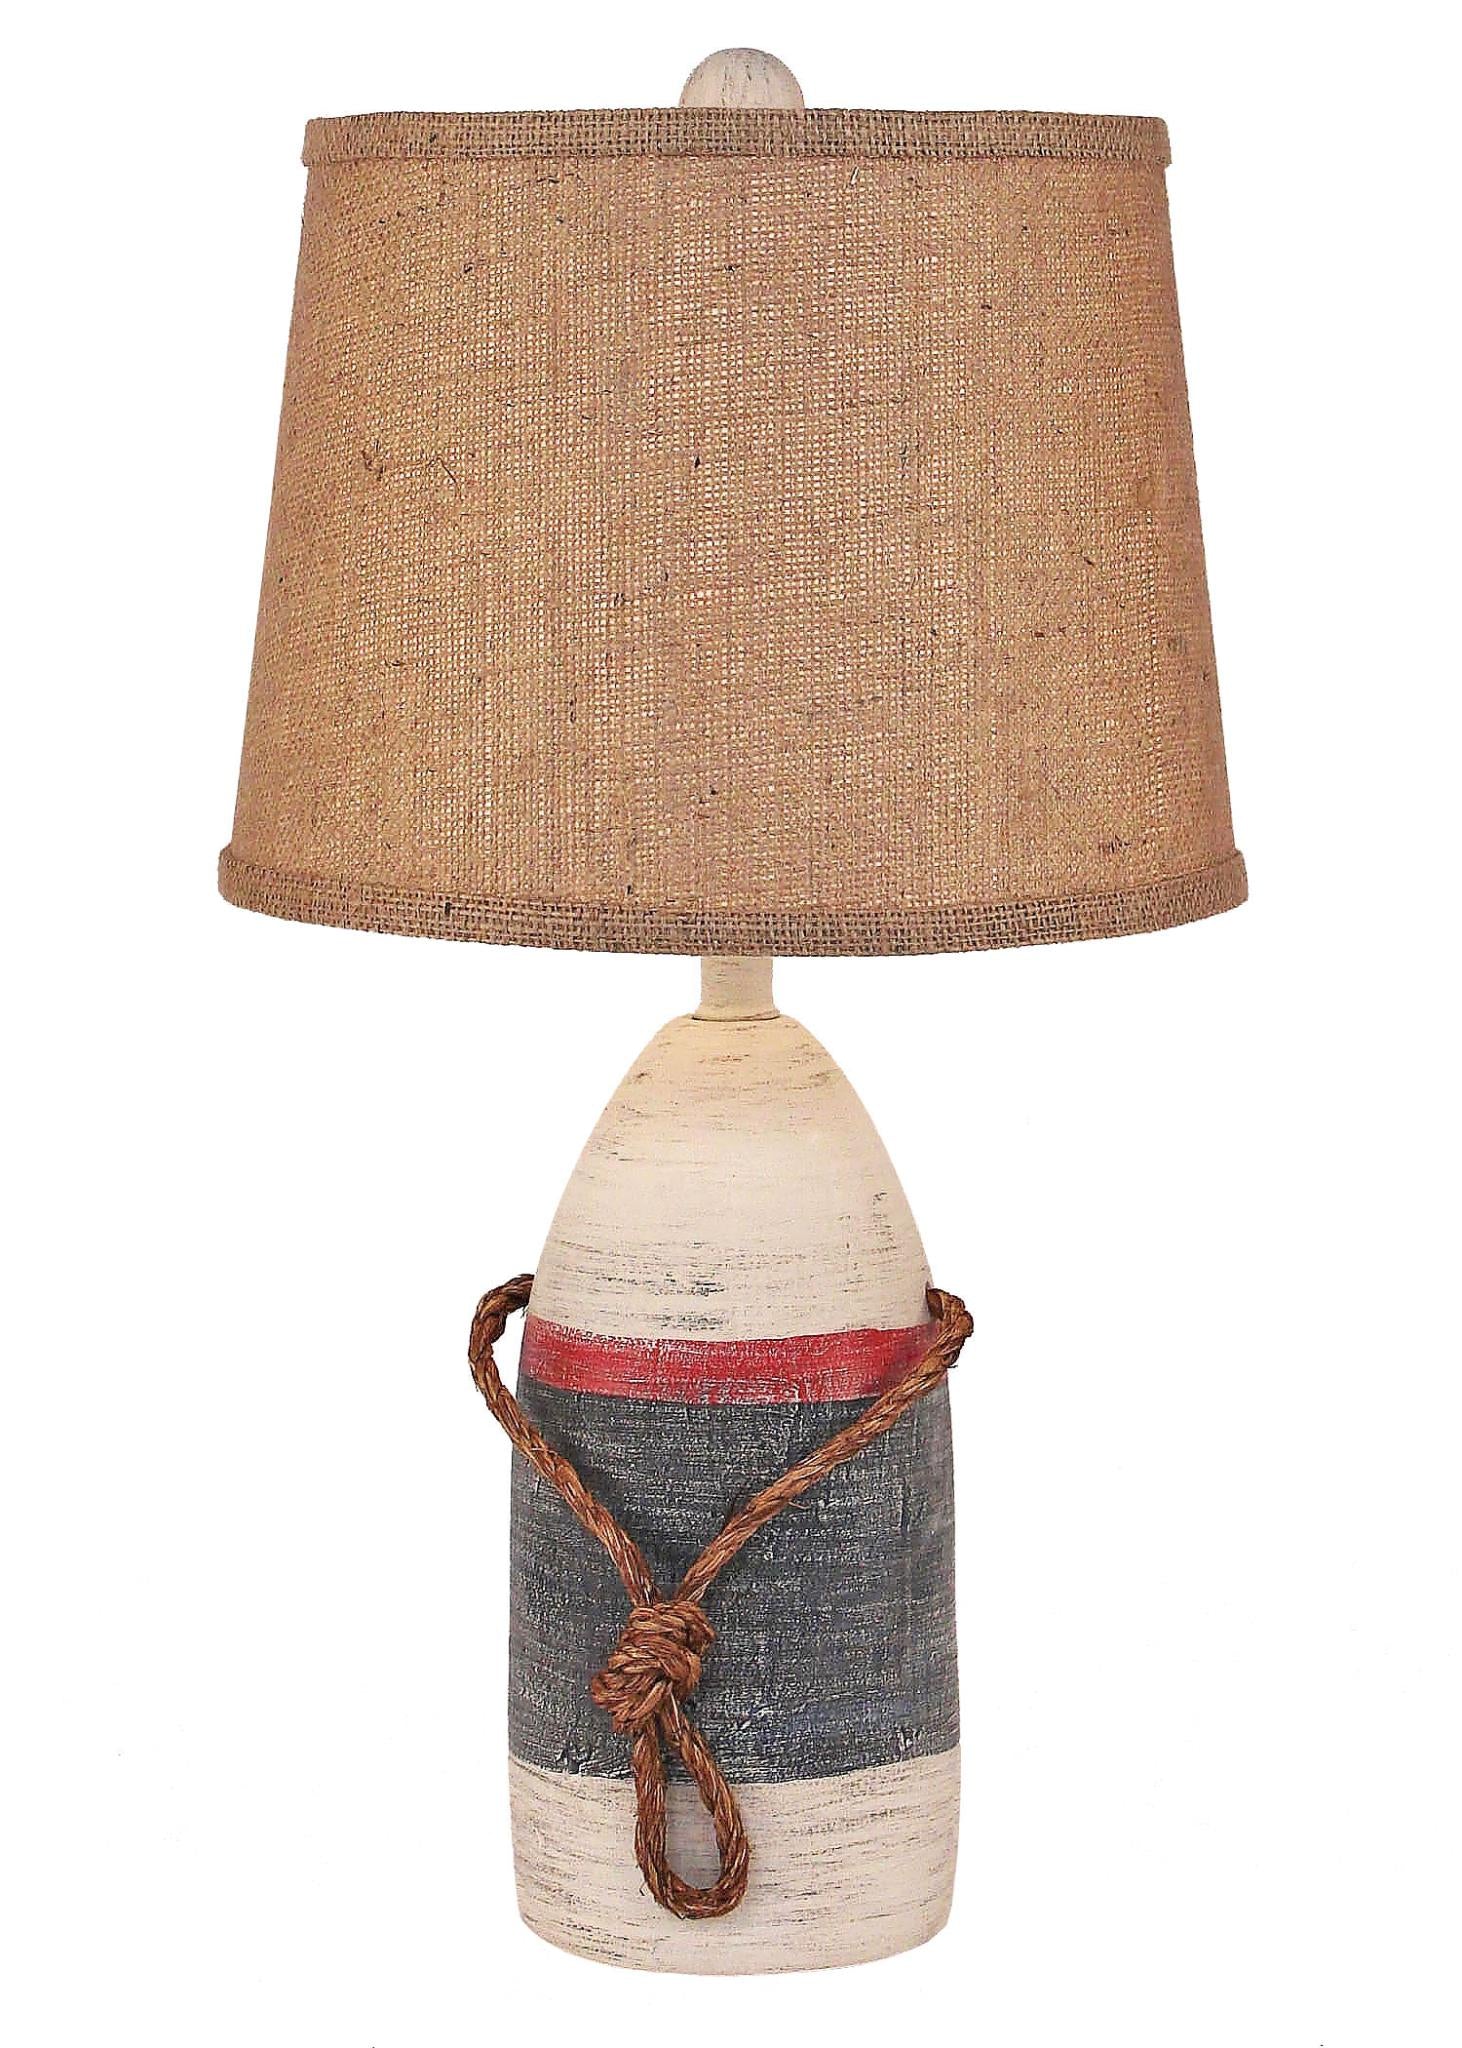 Small Bouy Rope Accent Lamp-Lamp-Nautical Decor and Gifts